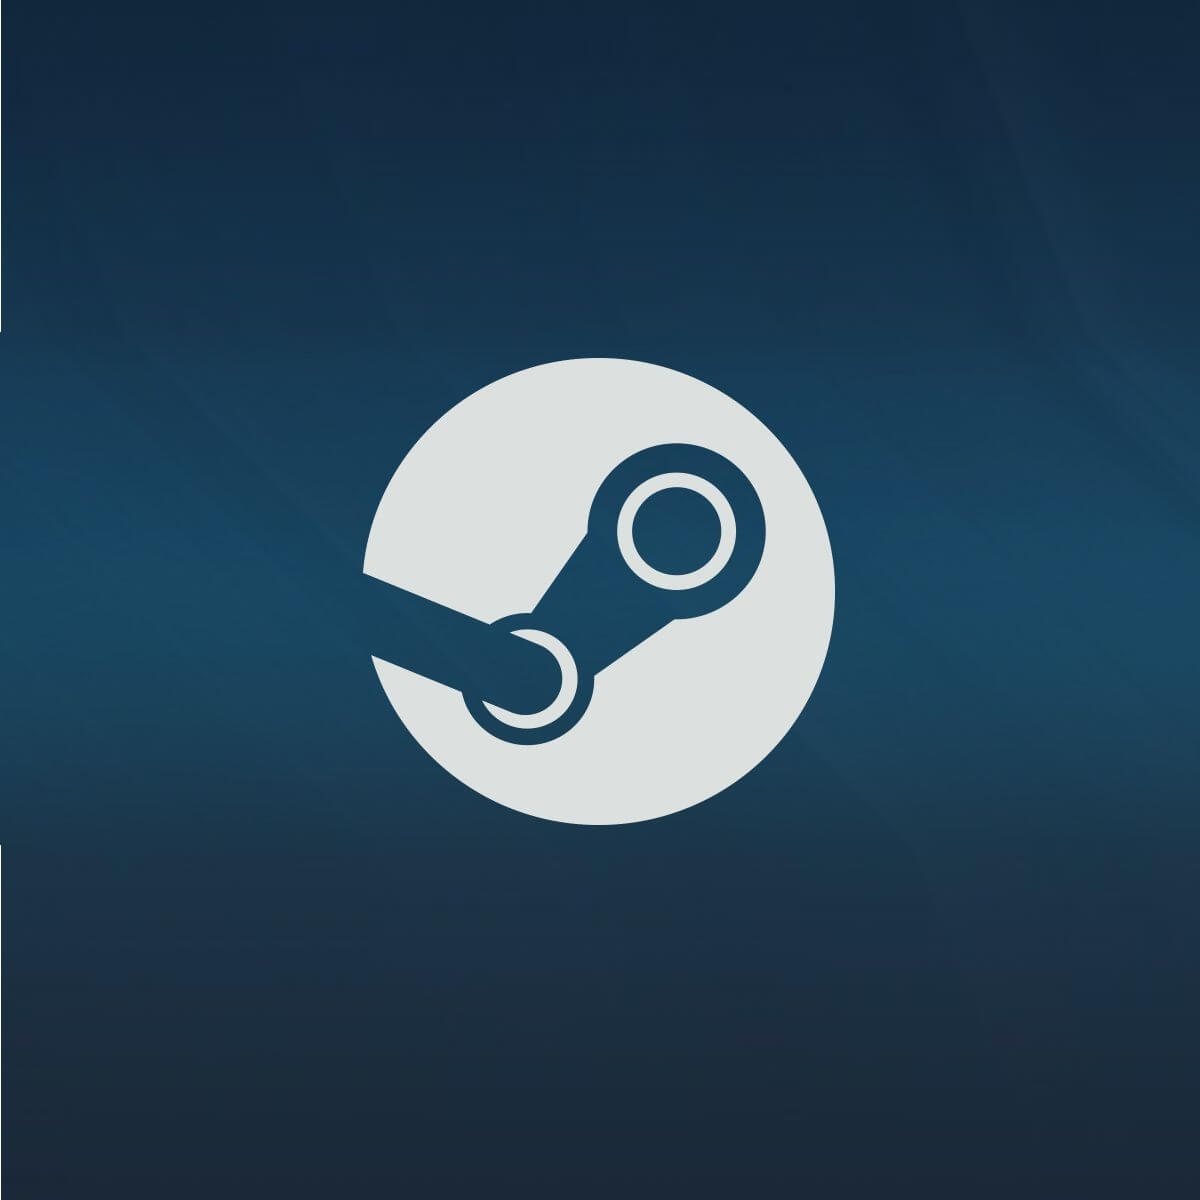 How To Update Your Steam Client To The Beta Version